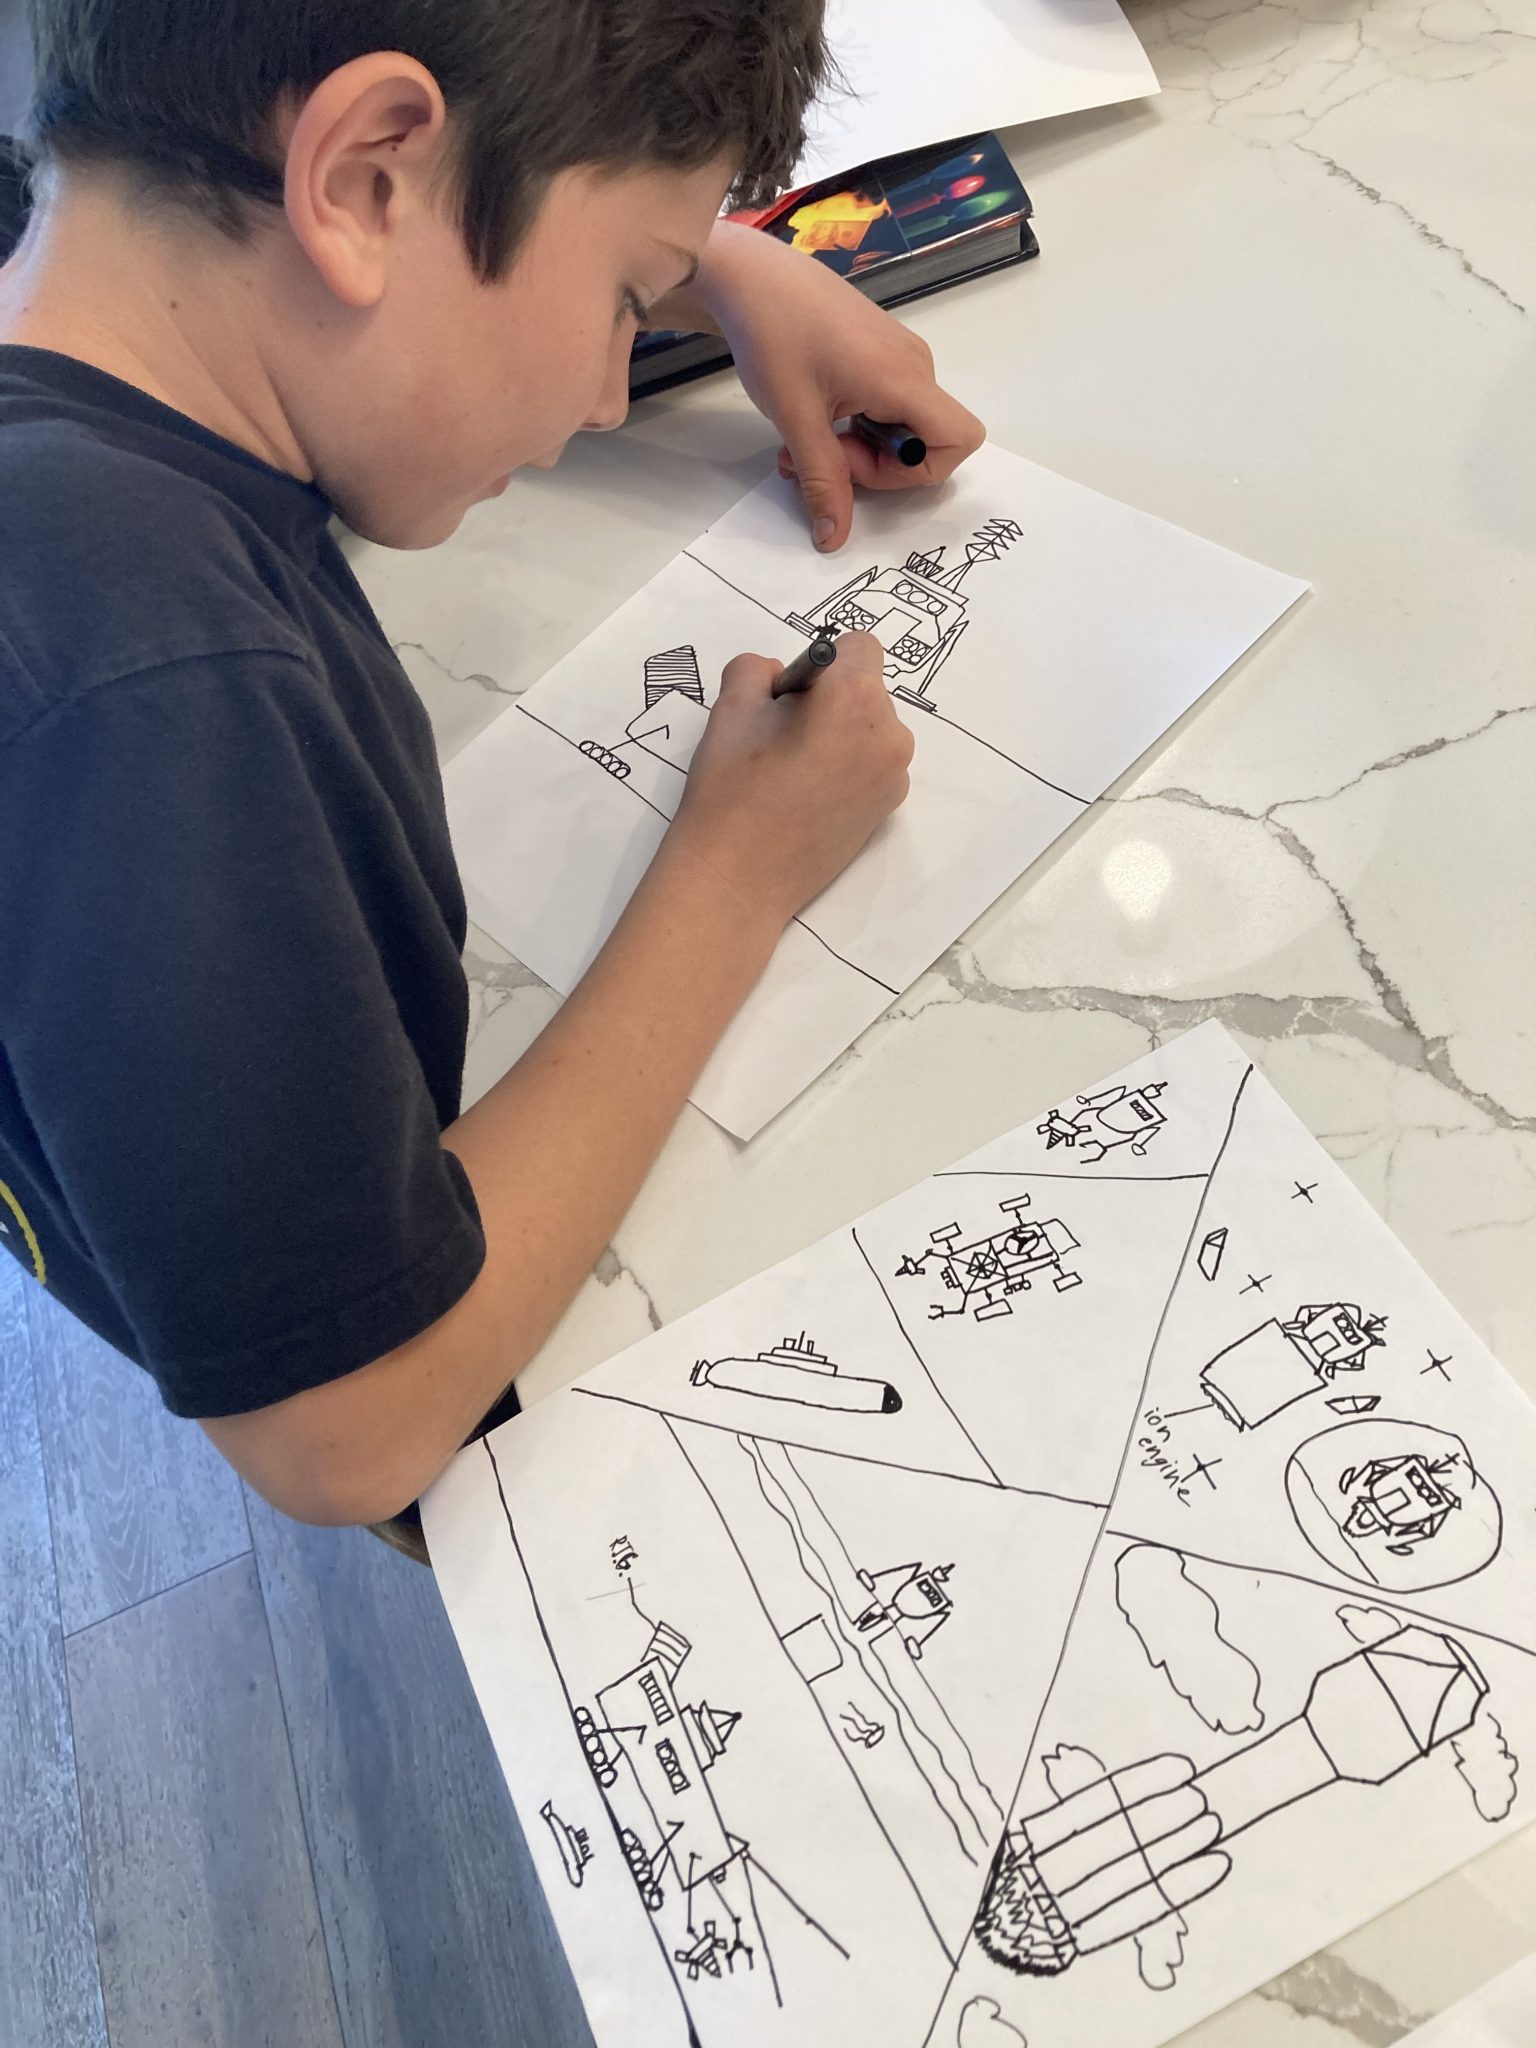 A young boy draws imagined spacecraft on paper.